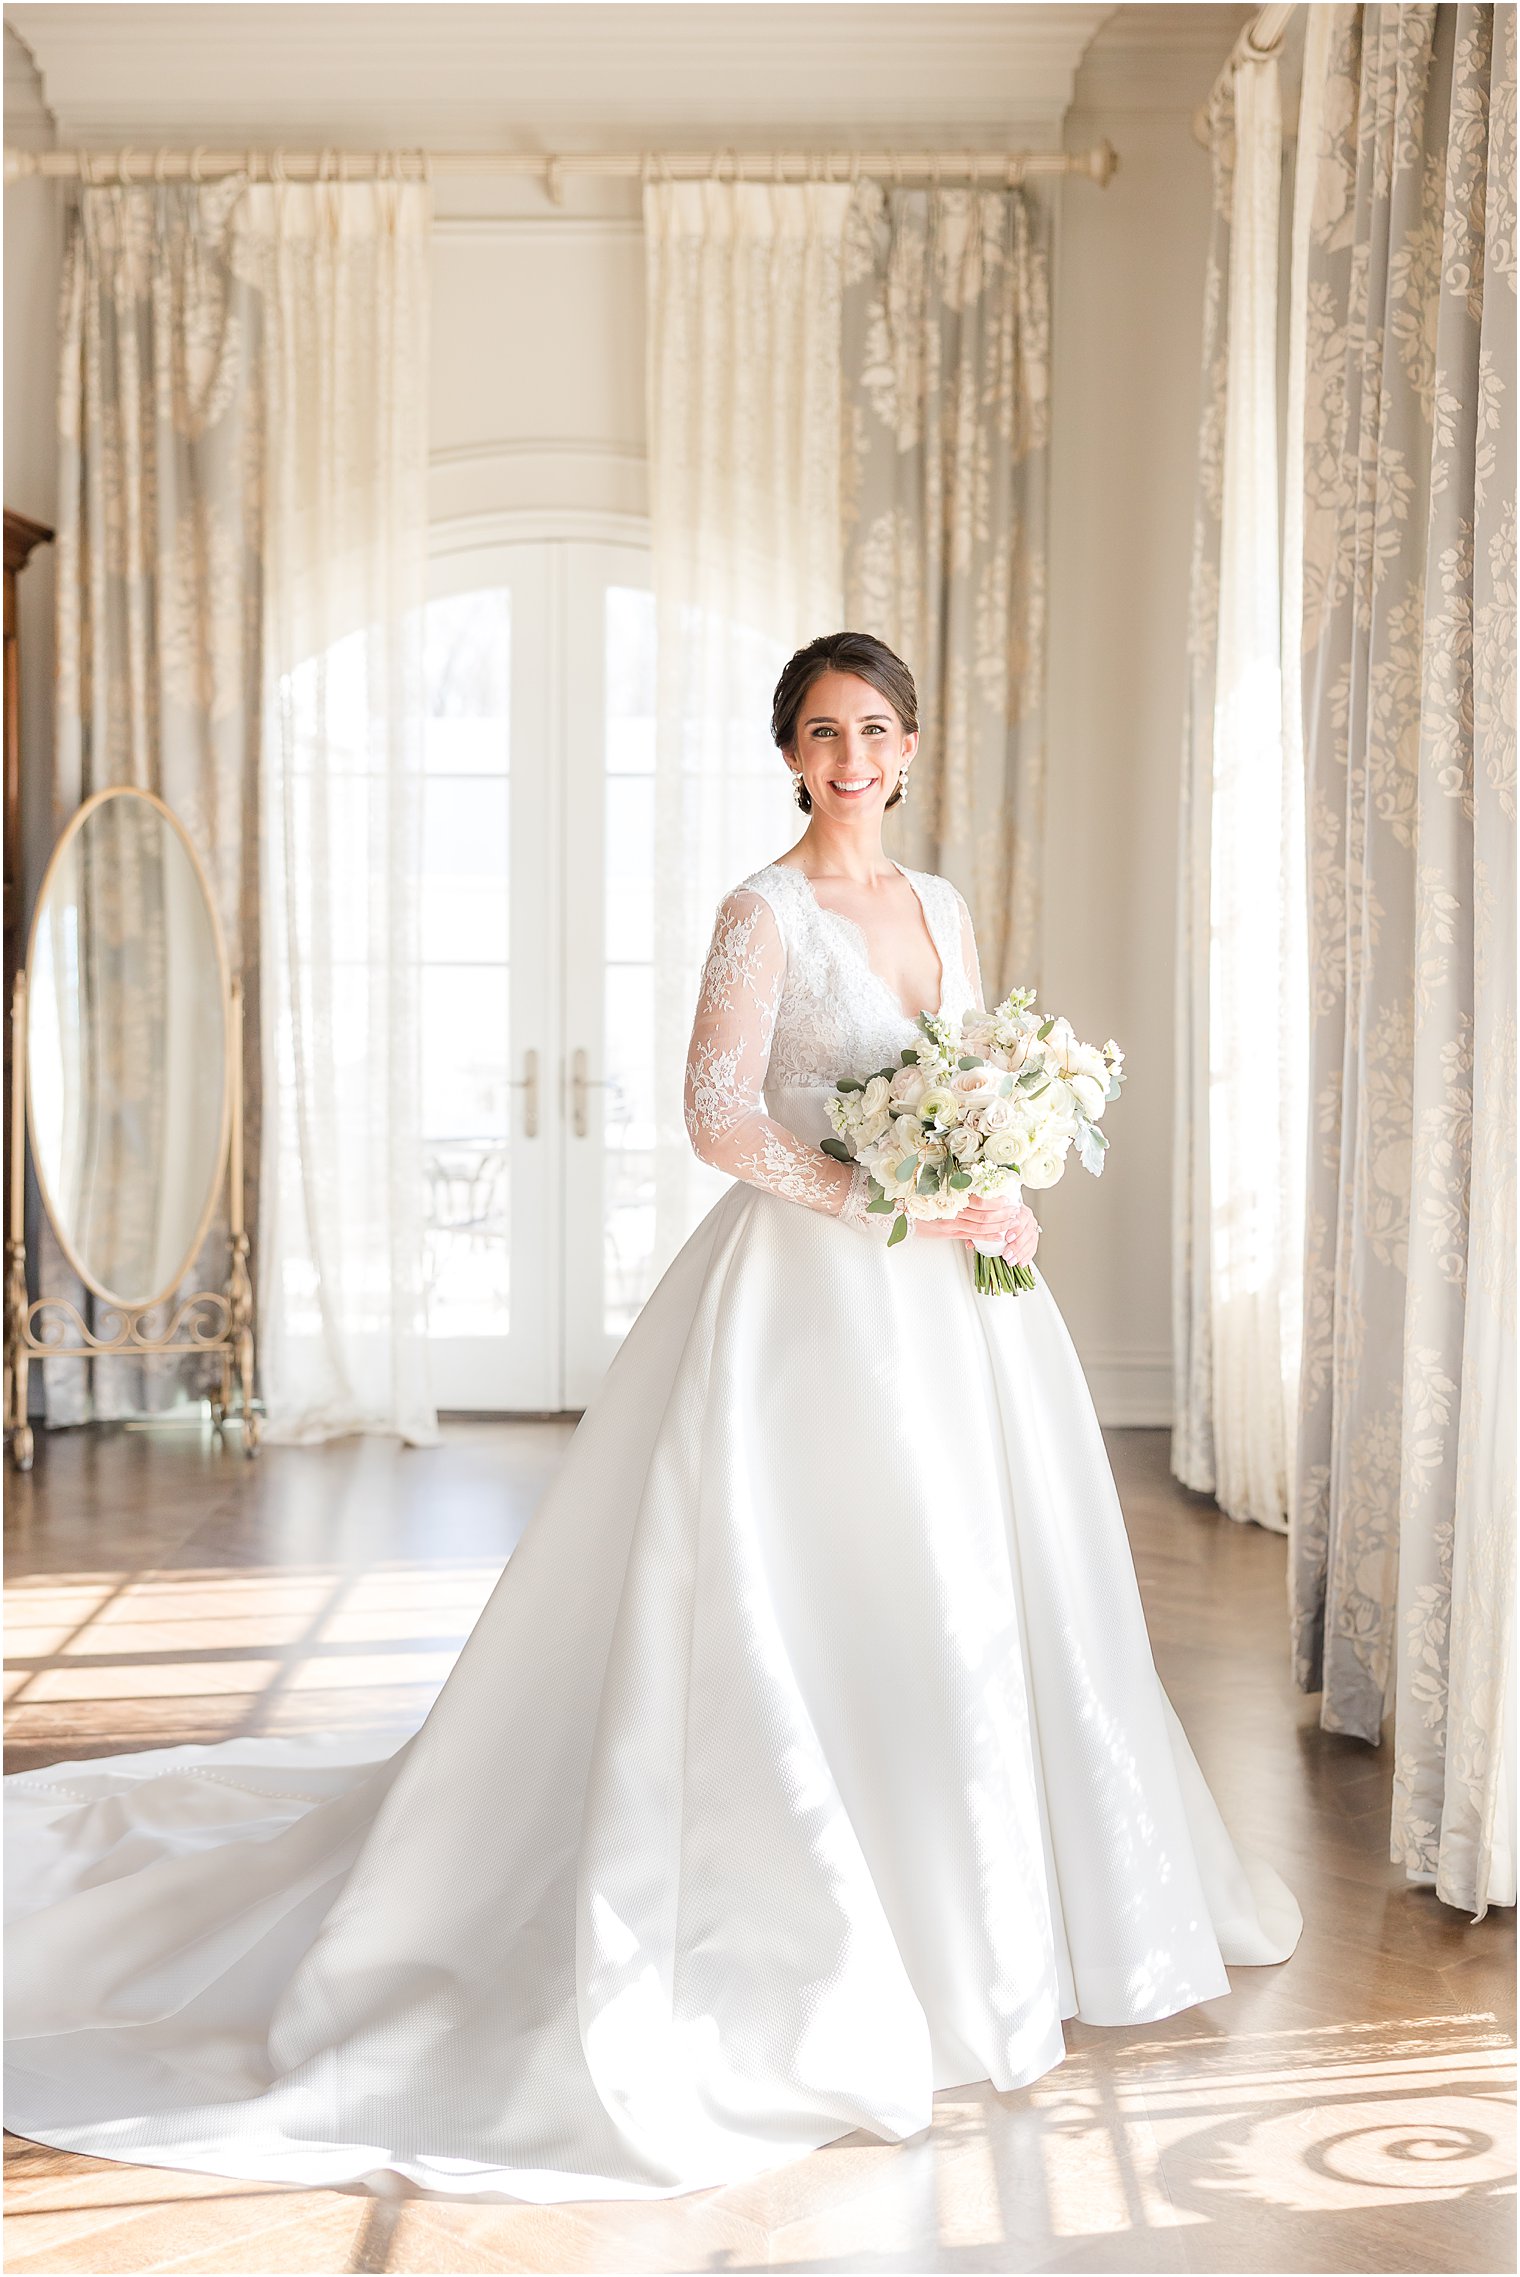 bride stands in wedding dress with lace sleeves by open window at Park Chateau Estate 